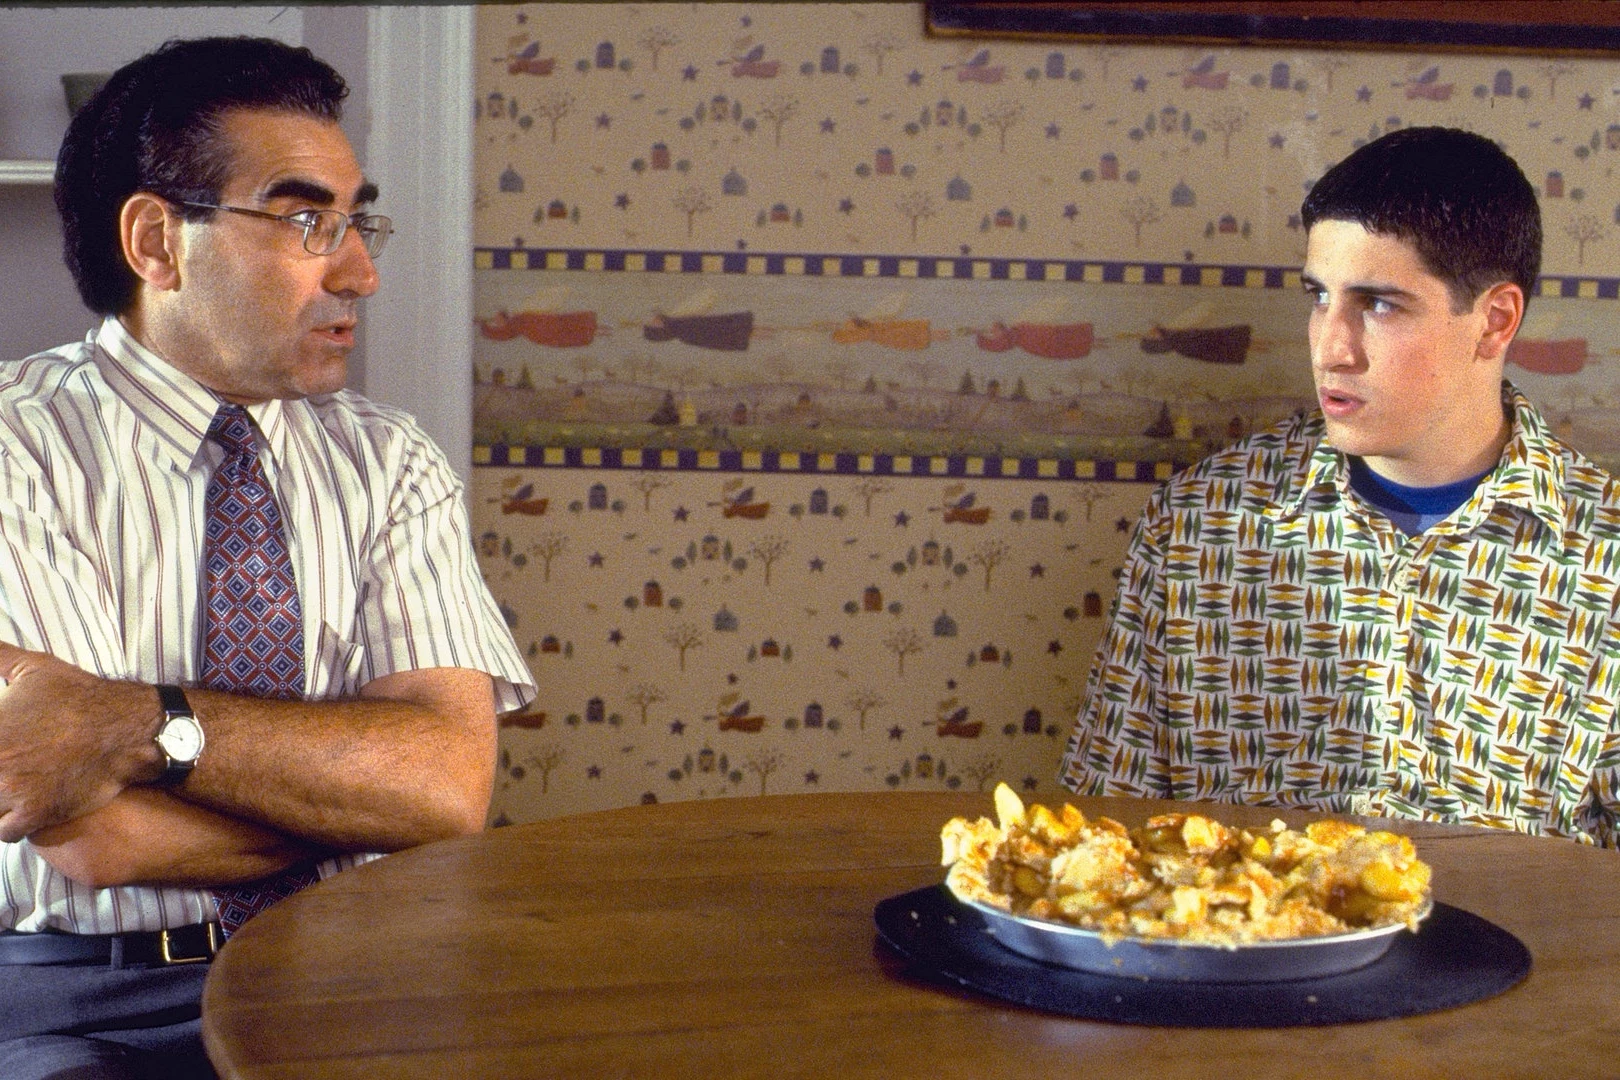 A New ‘American Pie’ Movie Is In The Works